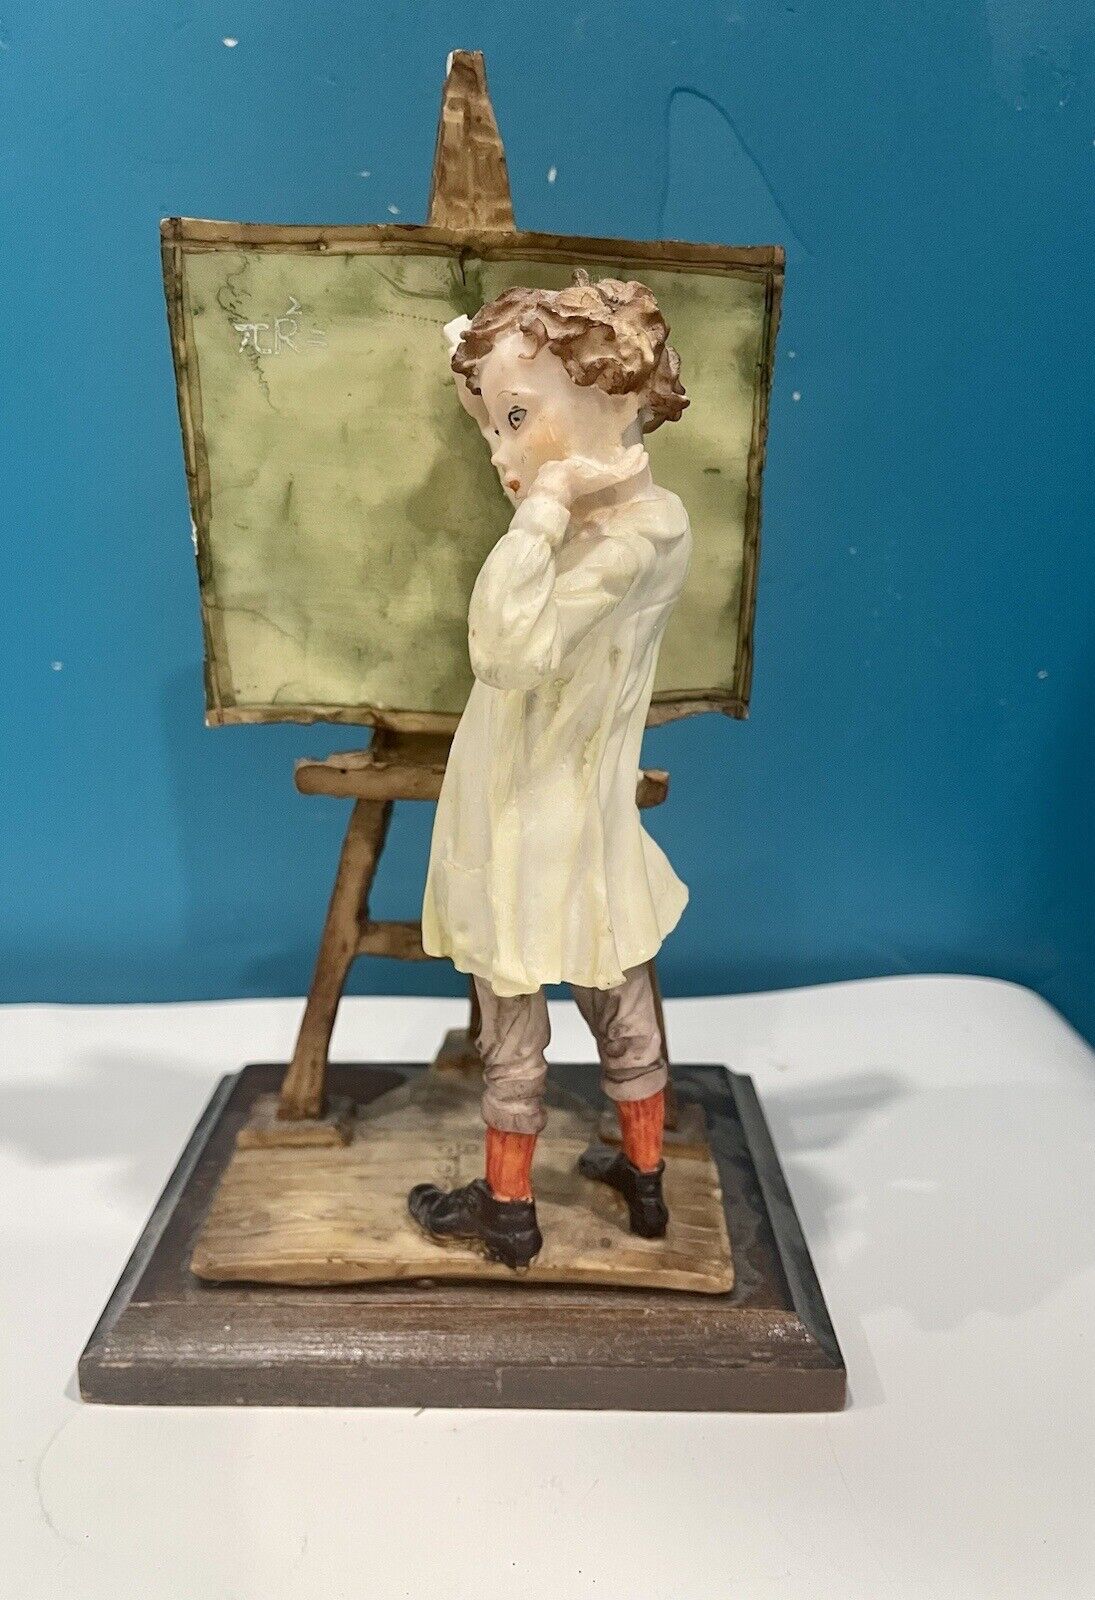 Vintage Capodimonte Girl at Chalkboard In School Figurine Italy